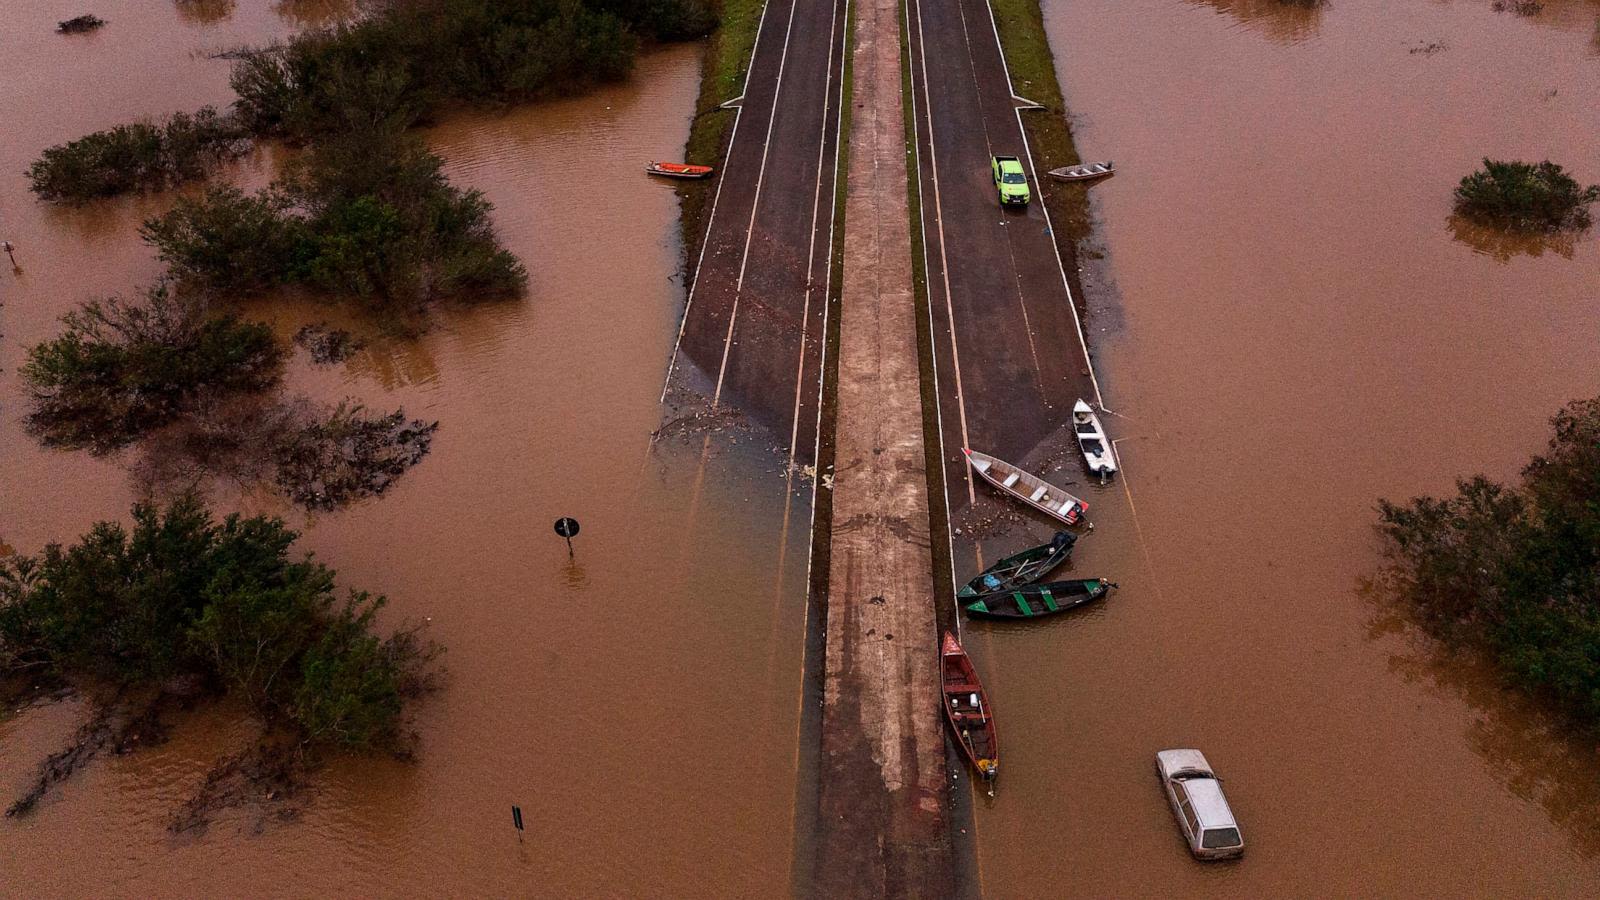 Flood-stricken Brazil continues to battle rising river levels, 149 confirmed dead